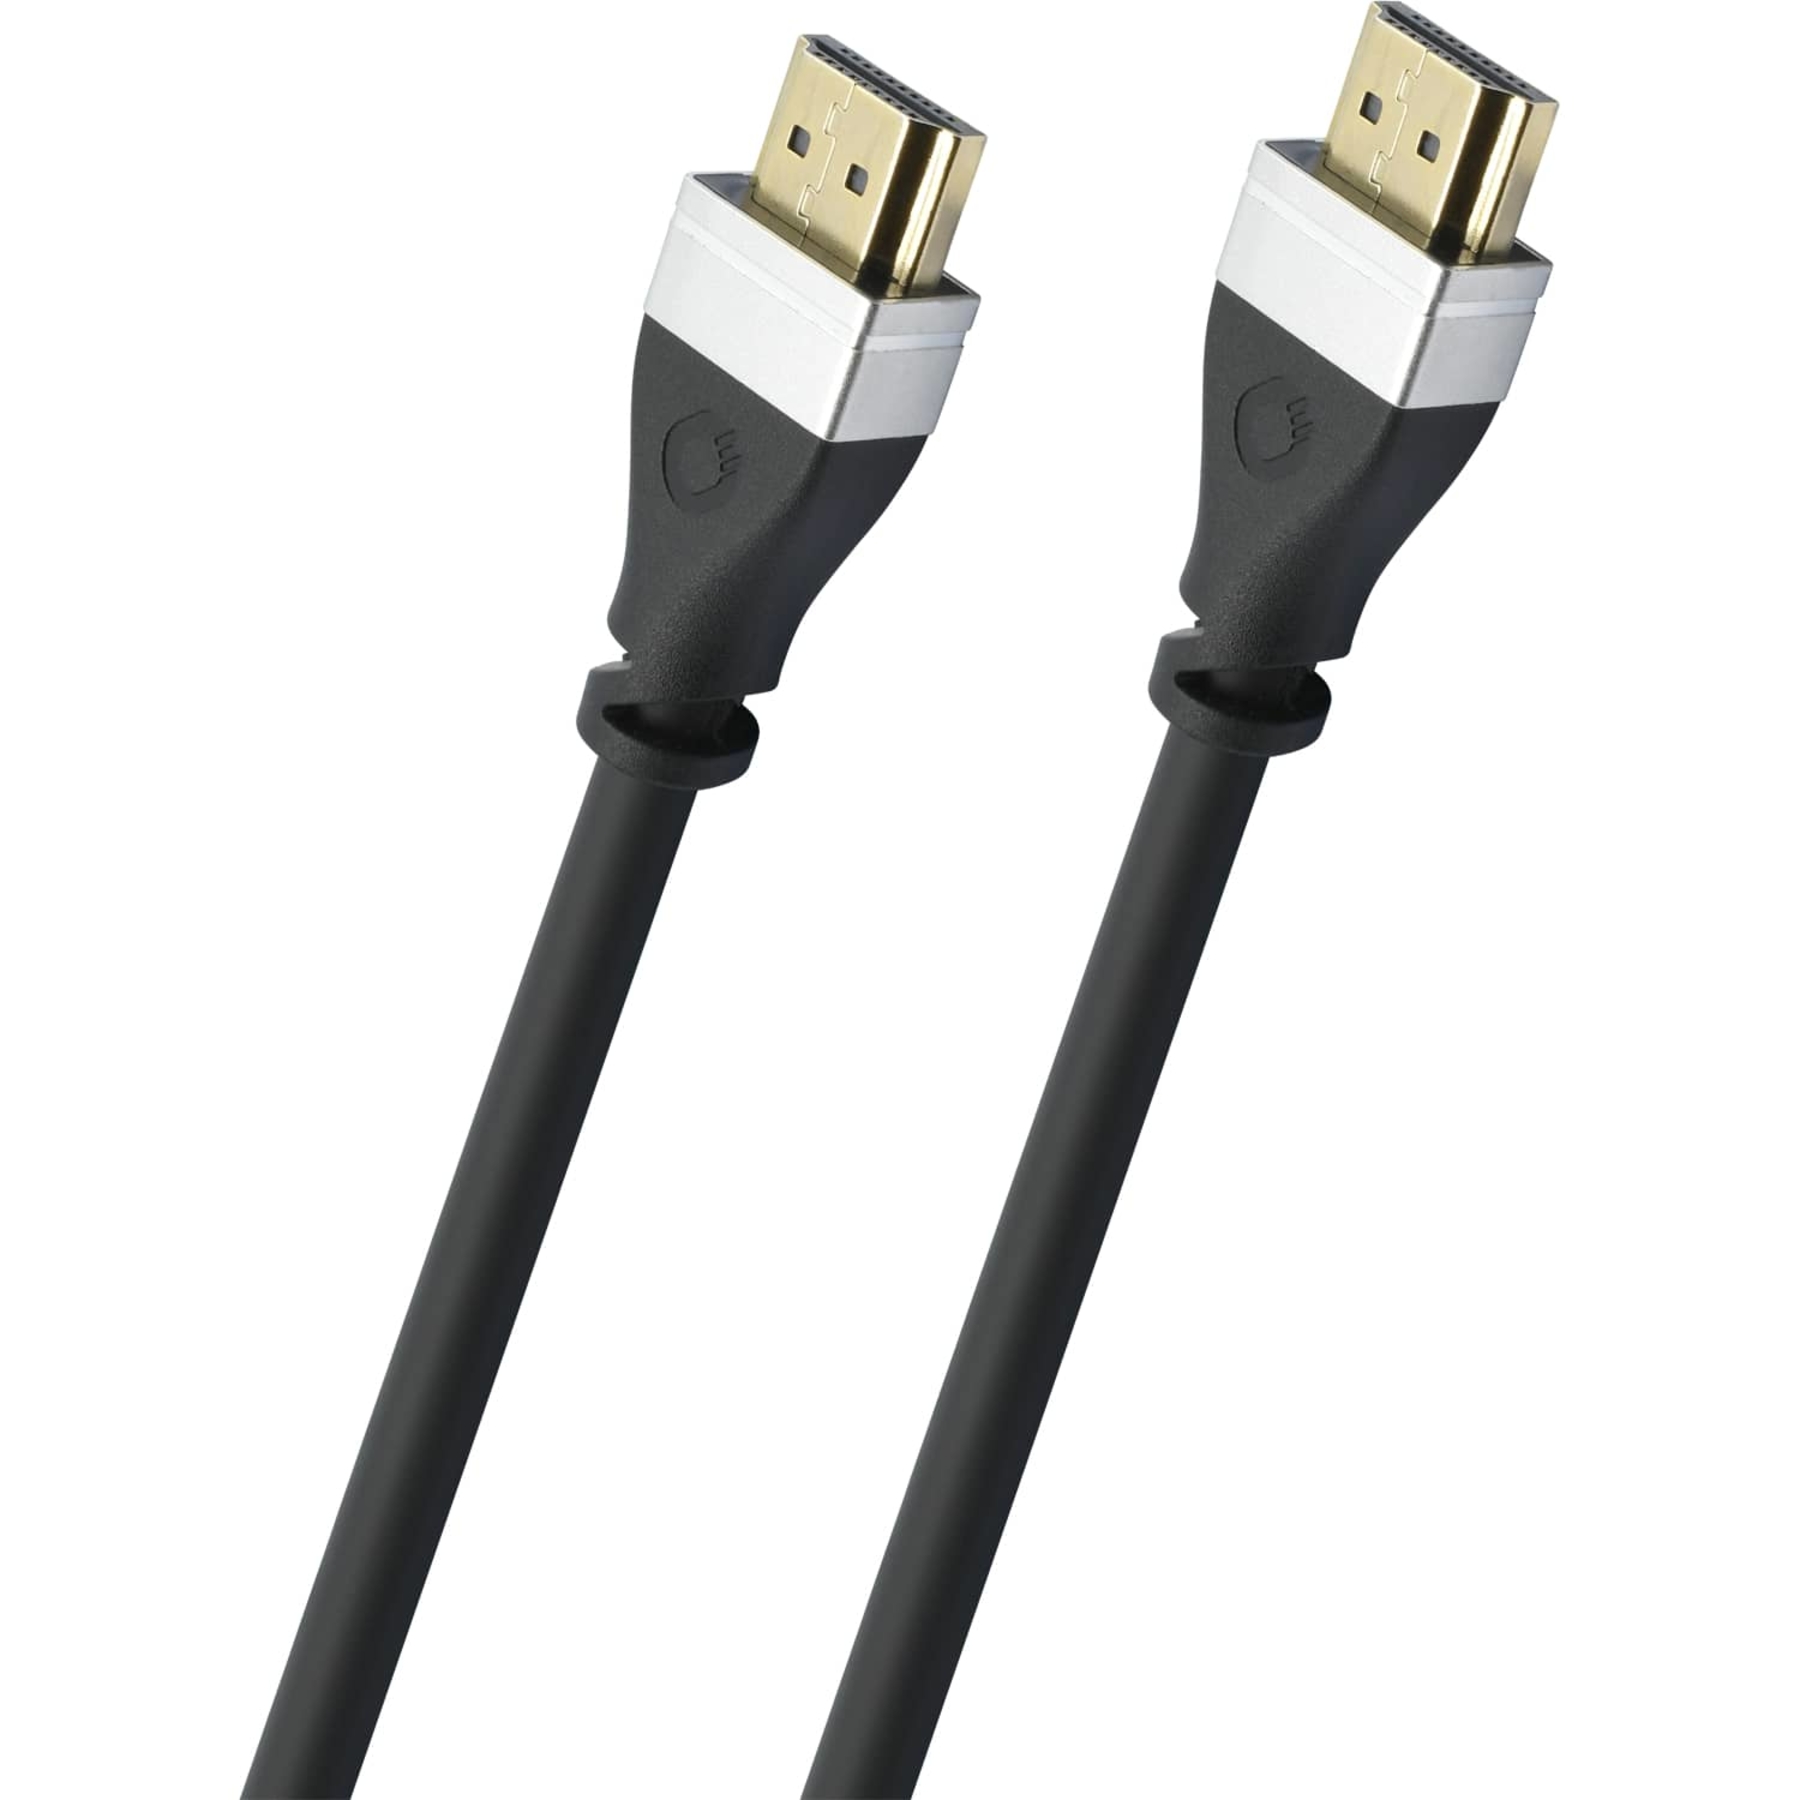 HDMI кабели Oehlbach EXCELLENCE Select Video Link, UHS HDMI 2.1, 5.0m black, D1C33104 кабели межблочные аудио oehlbach excellence select opto link toslink cable 3 0m sw d1c33134